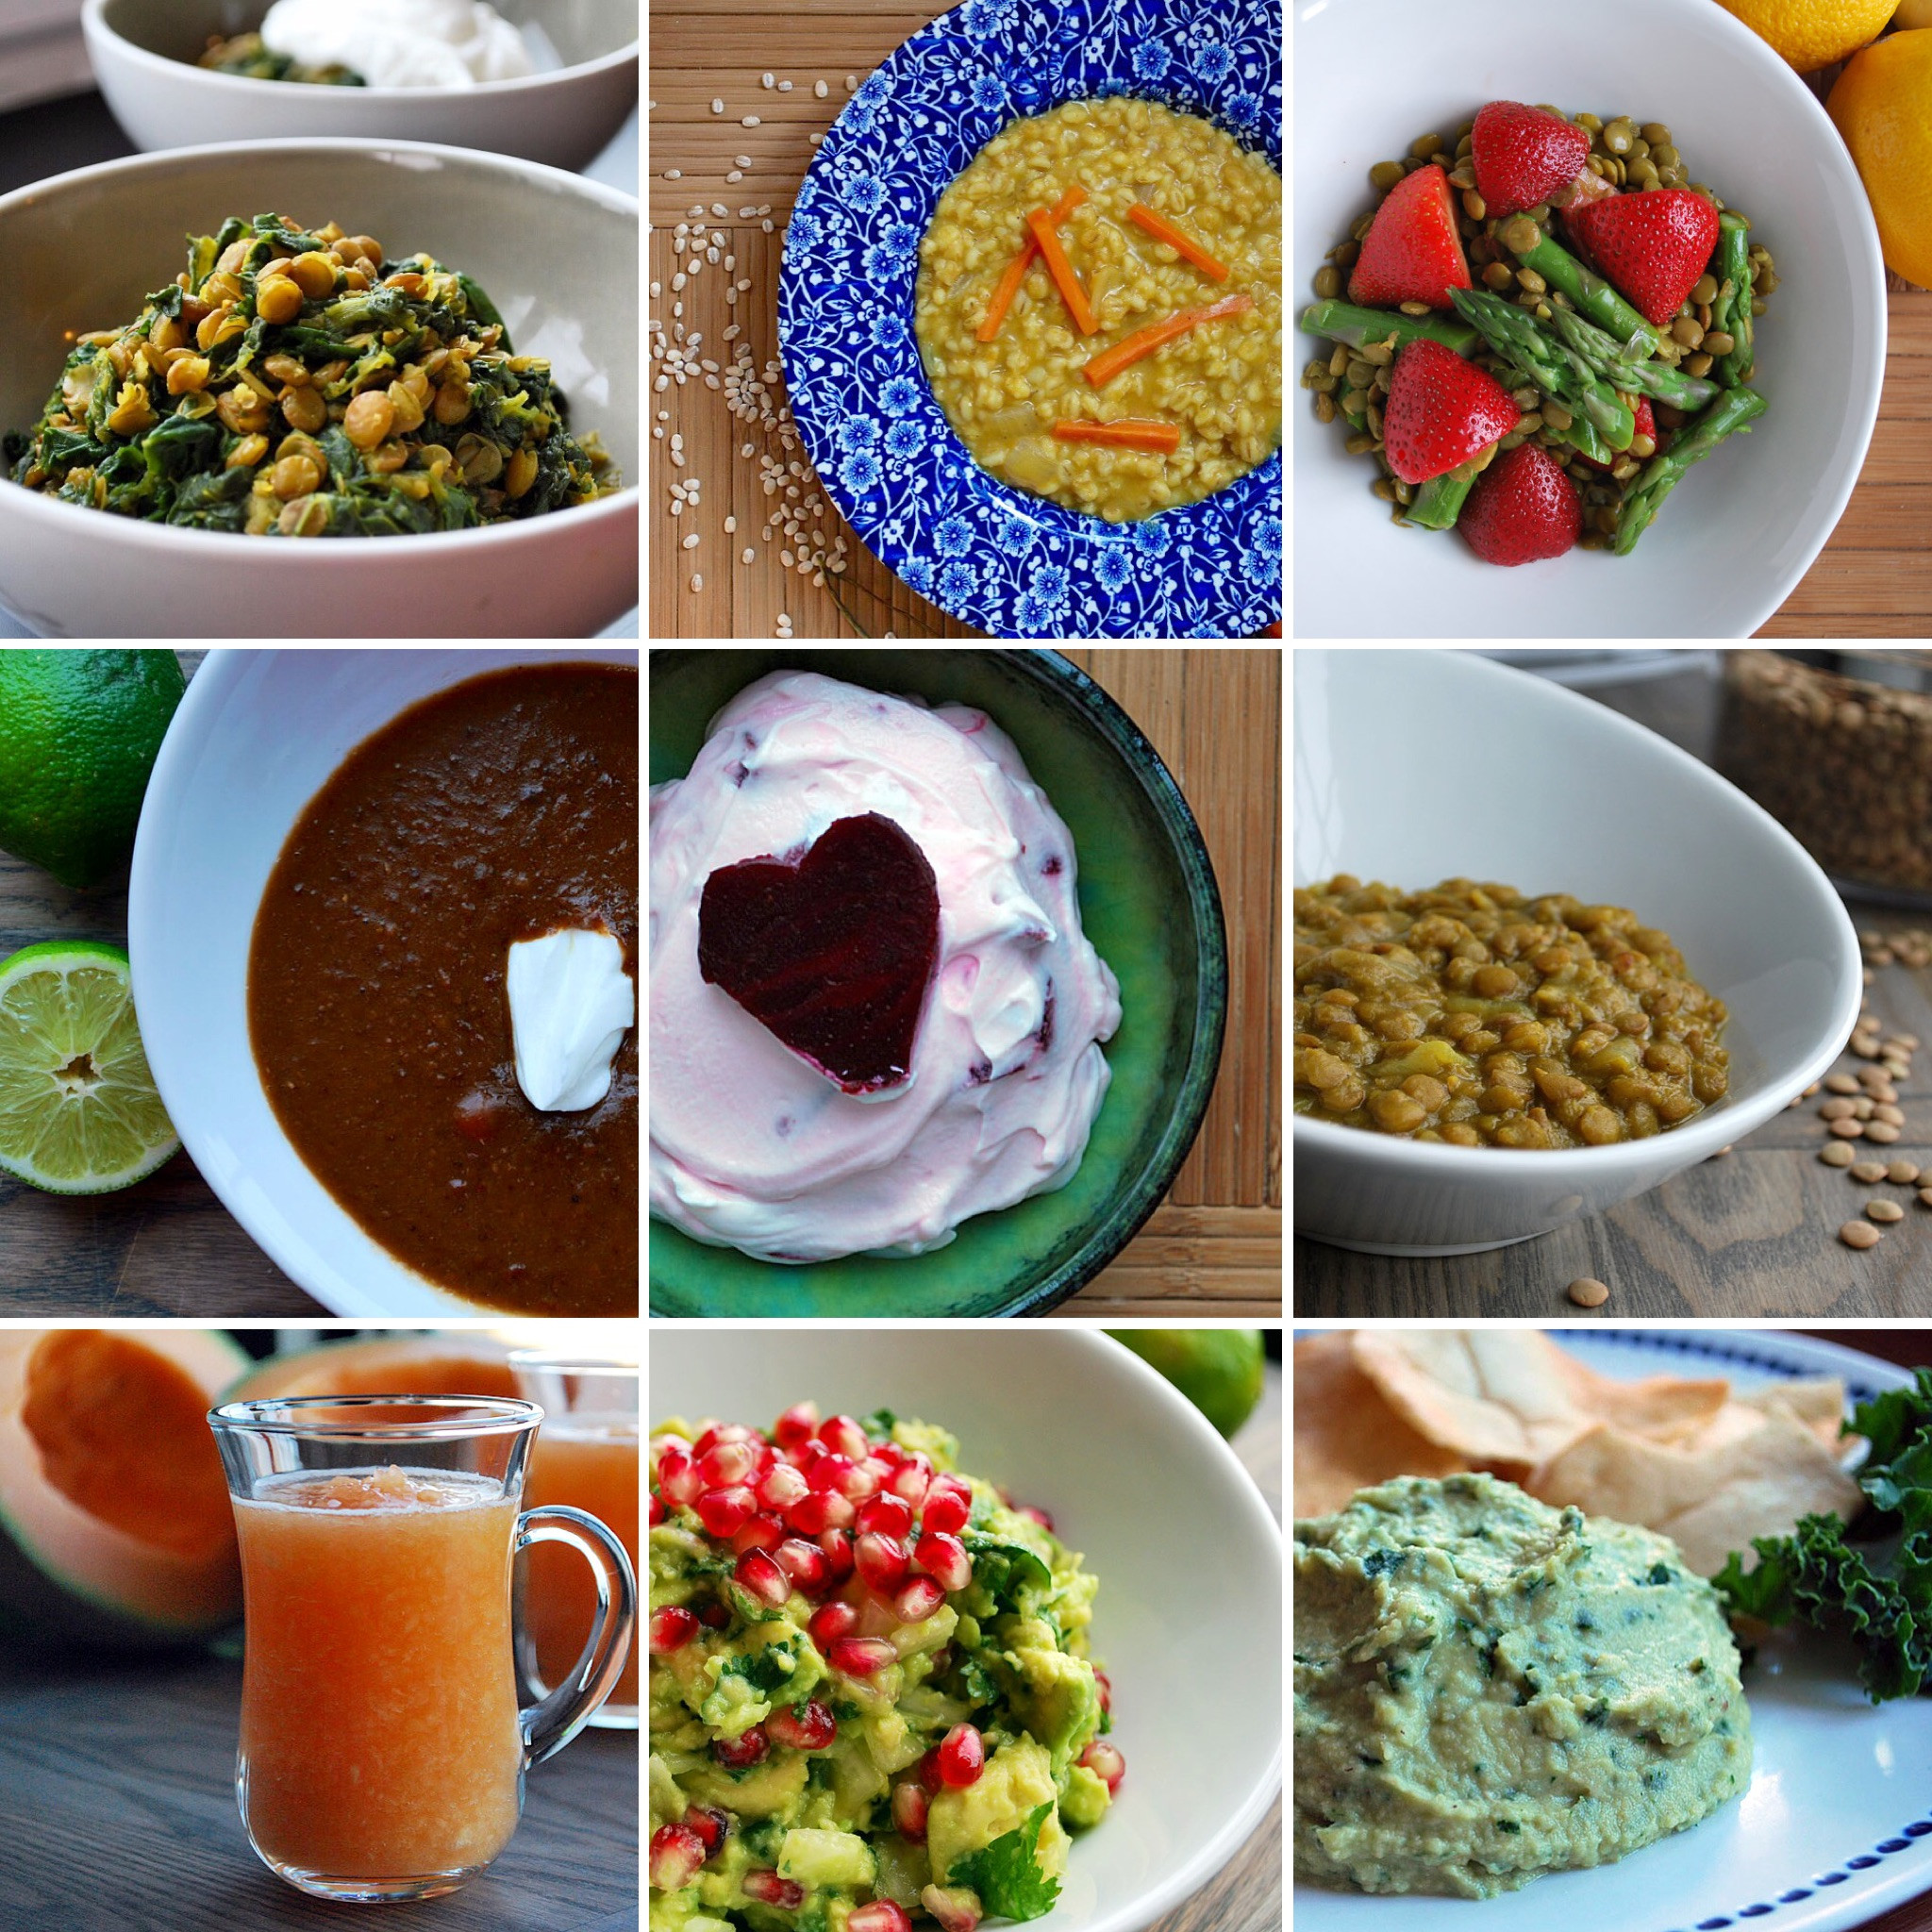 New Vegetarian Recipes
 10 Healthiest Ve arian Recipes for the New Year Ahu Eats